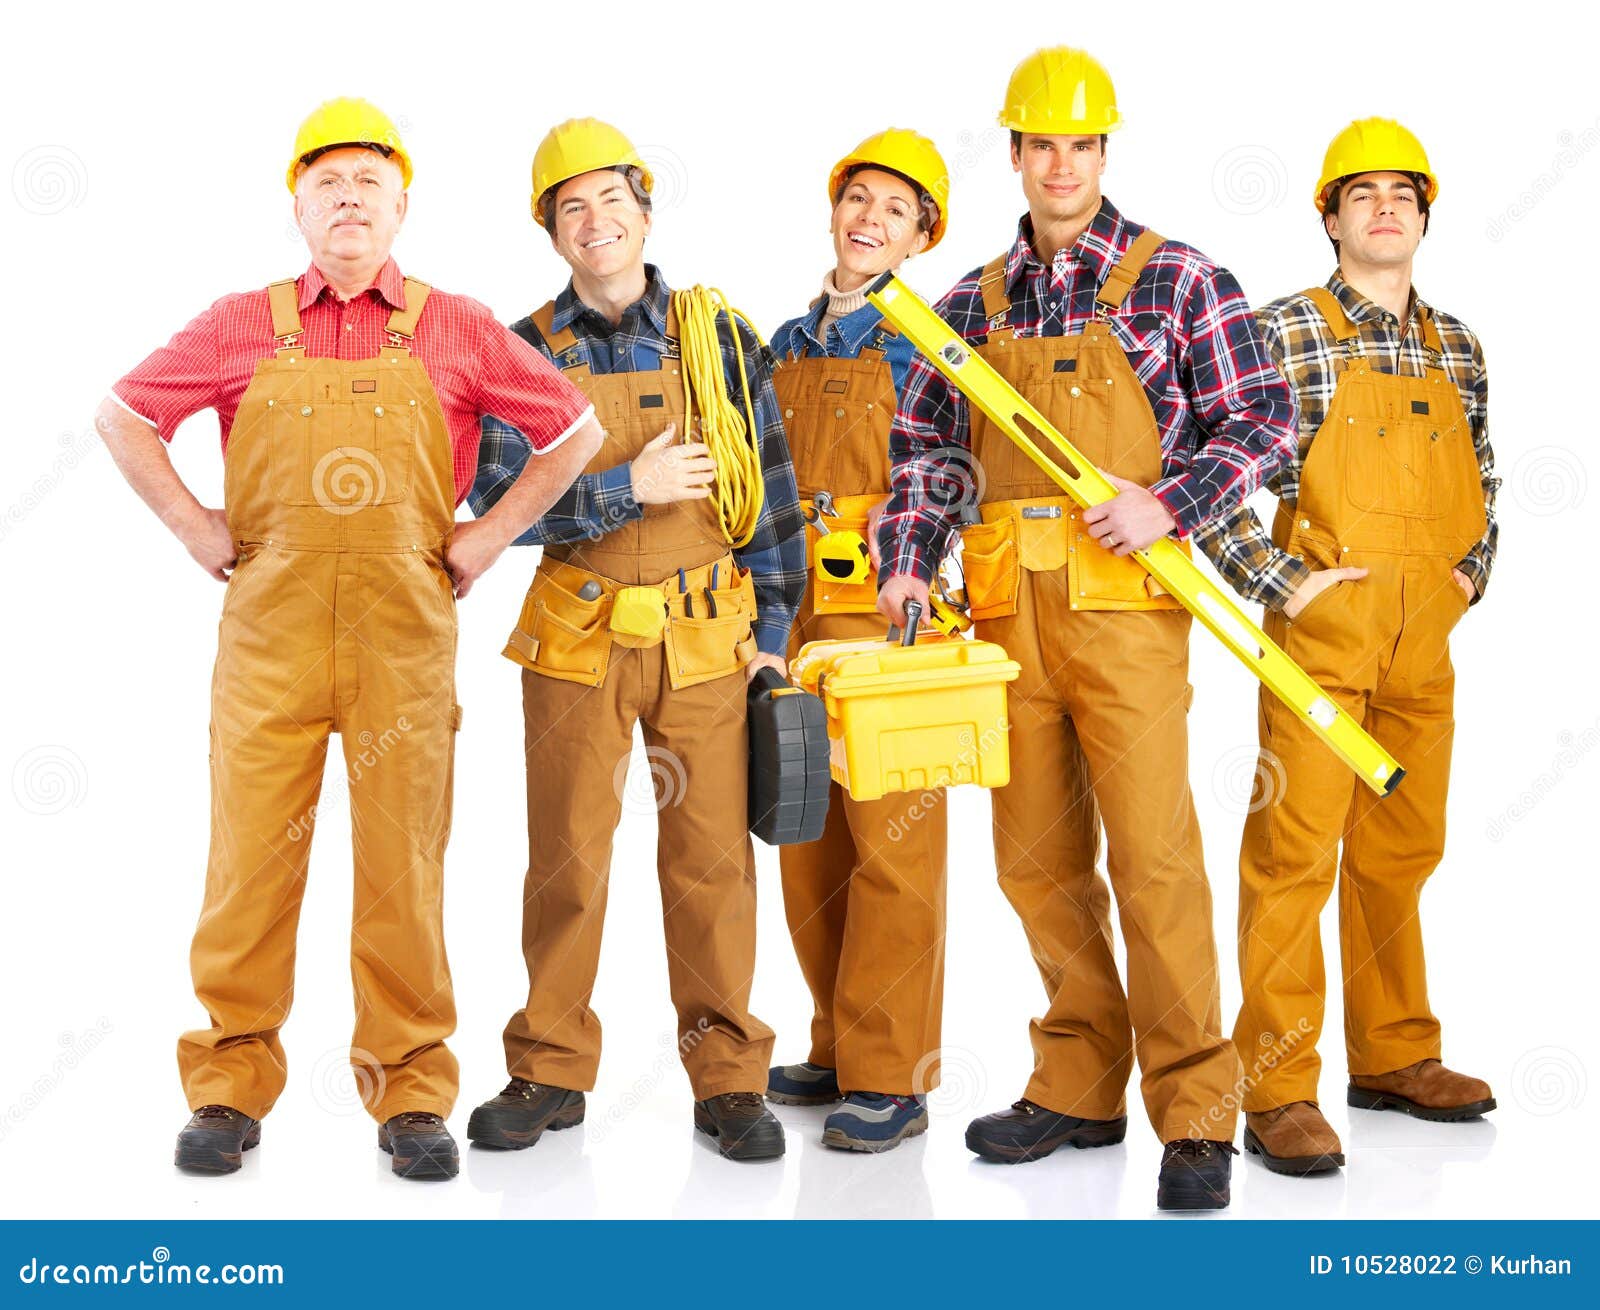 industrial worker clipart - photo #46